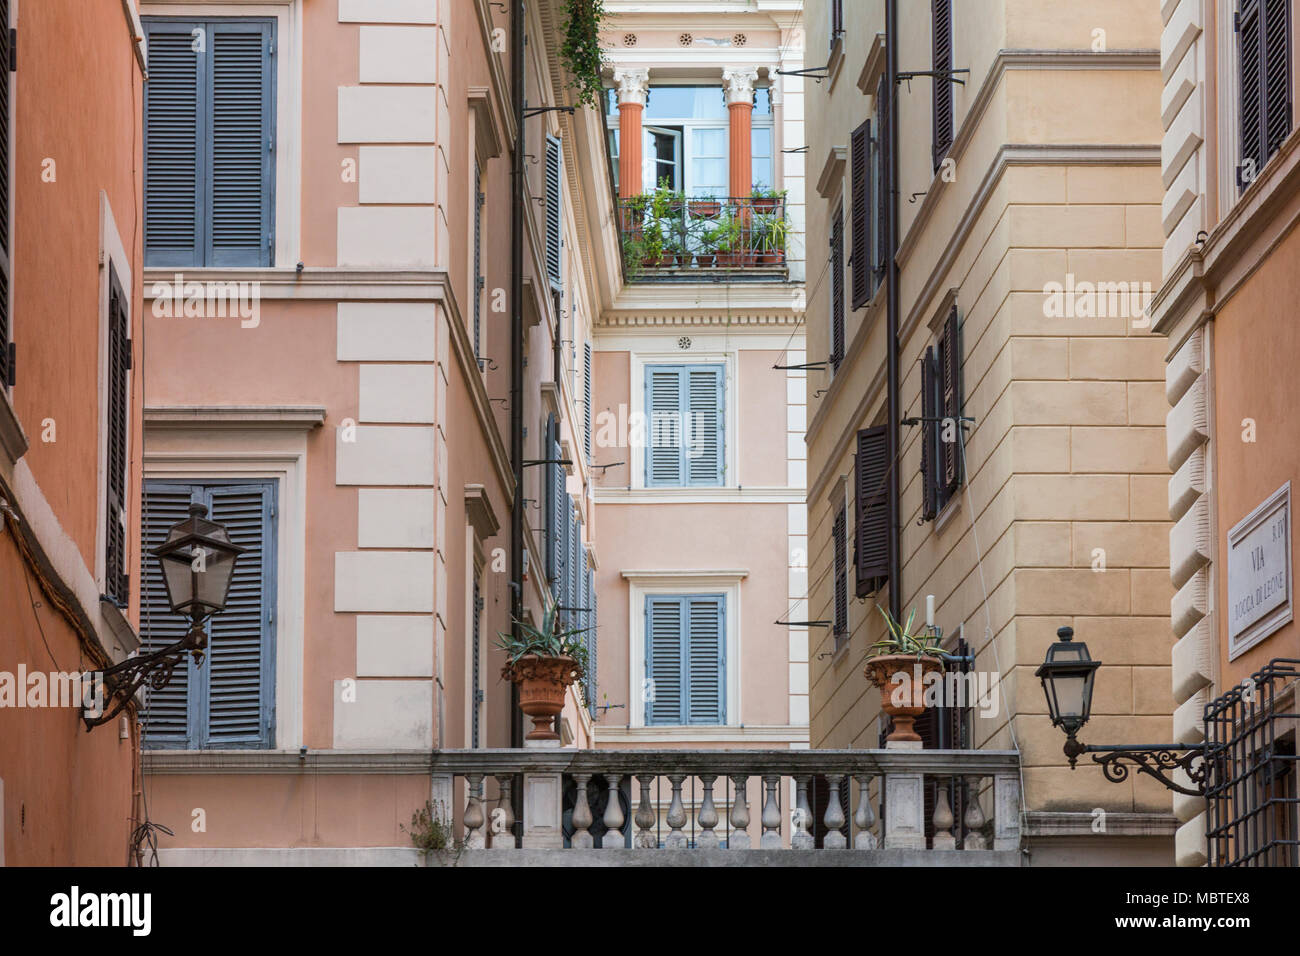 Bocca Di Leone High Resolution Stock Photography and Images - Alamy